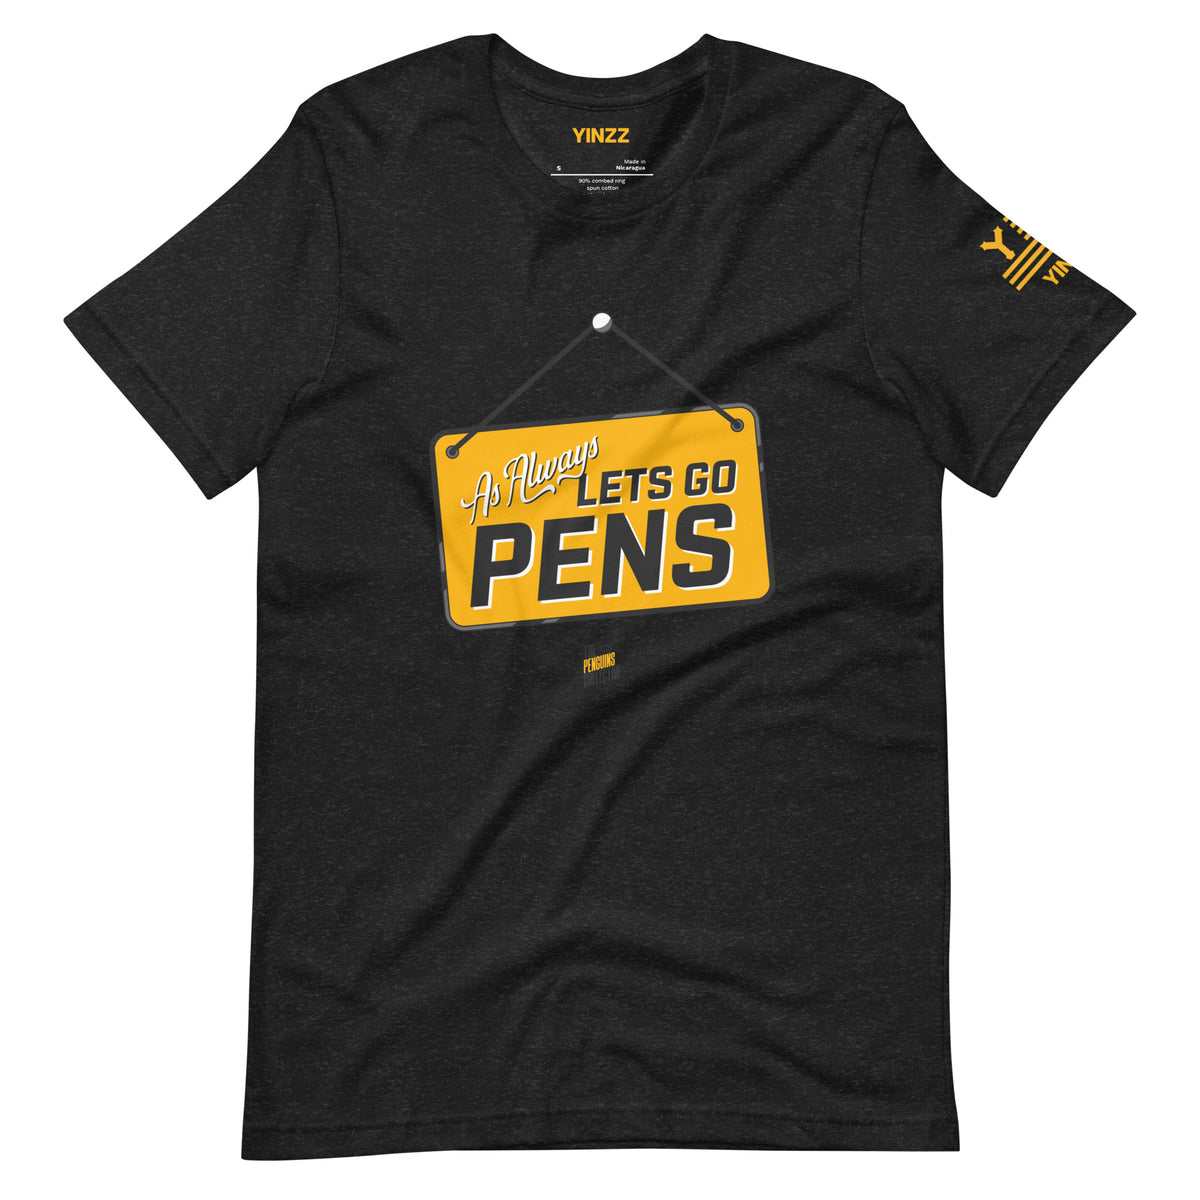 TPC Collab | As Always, LETS GO PENS | Yinzz Tee